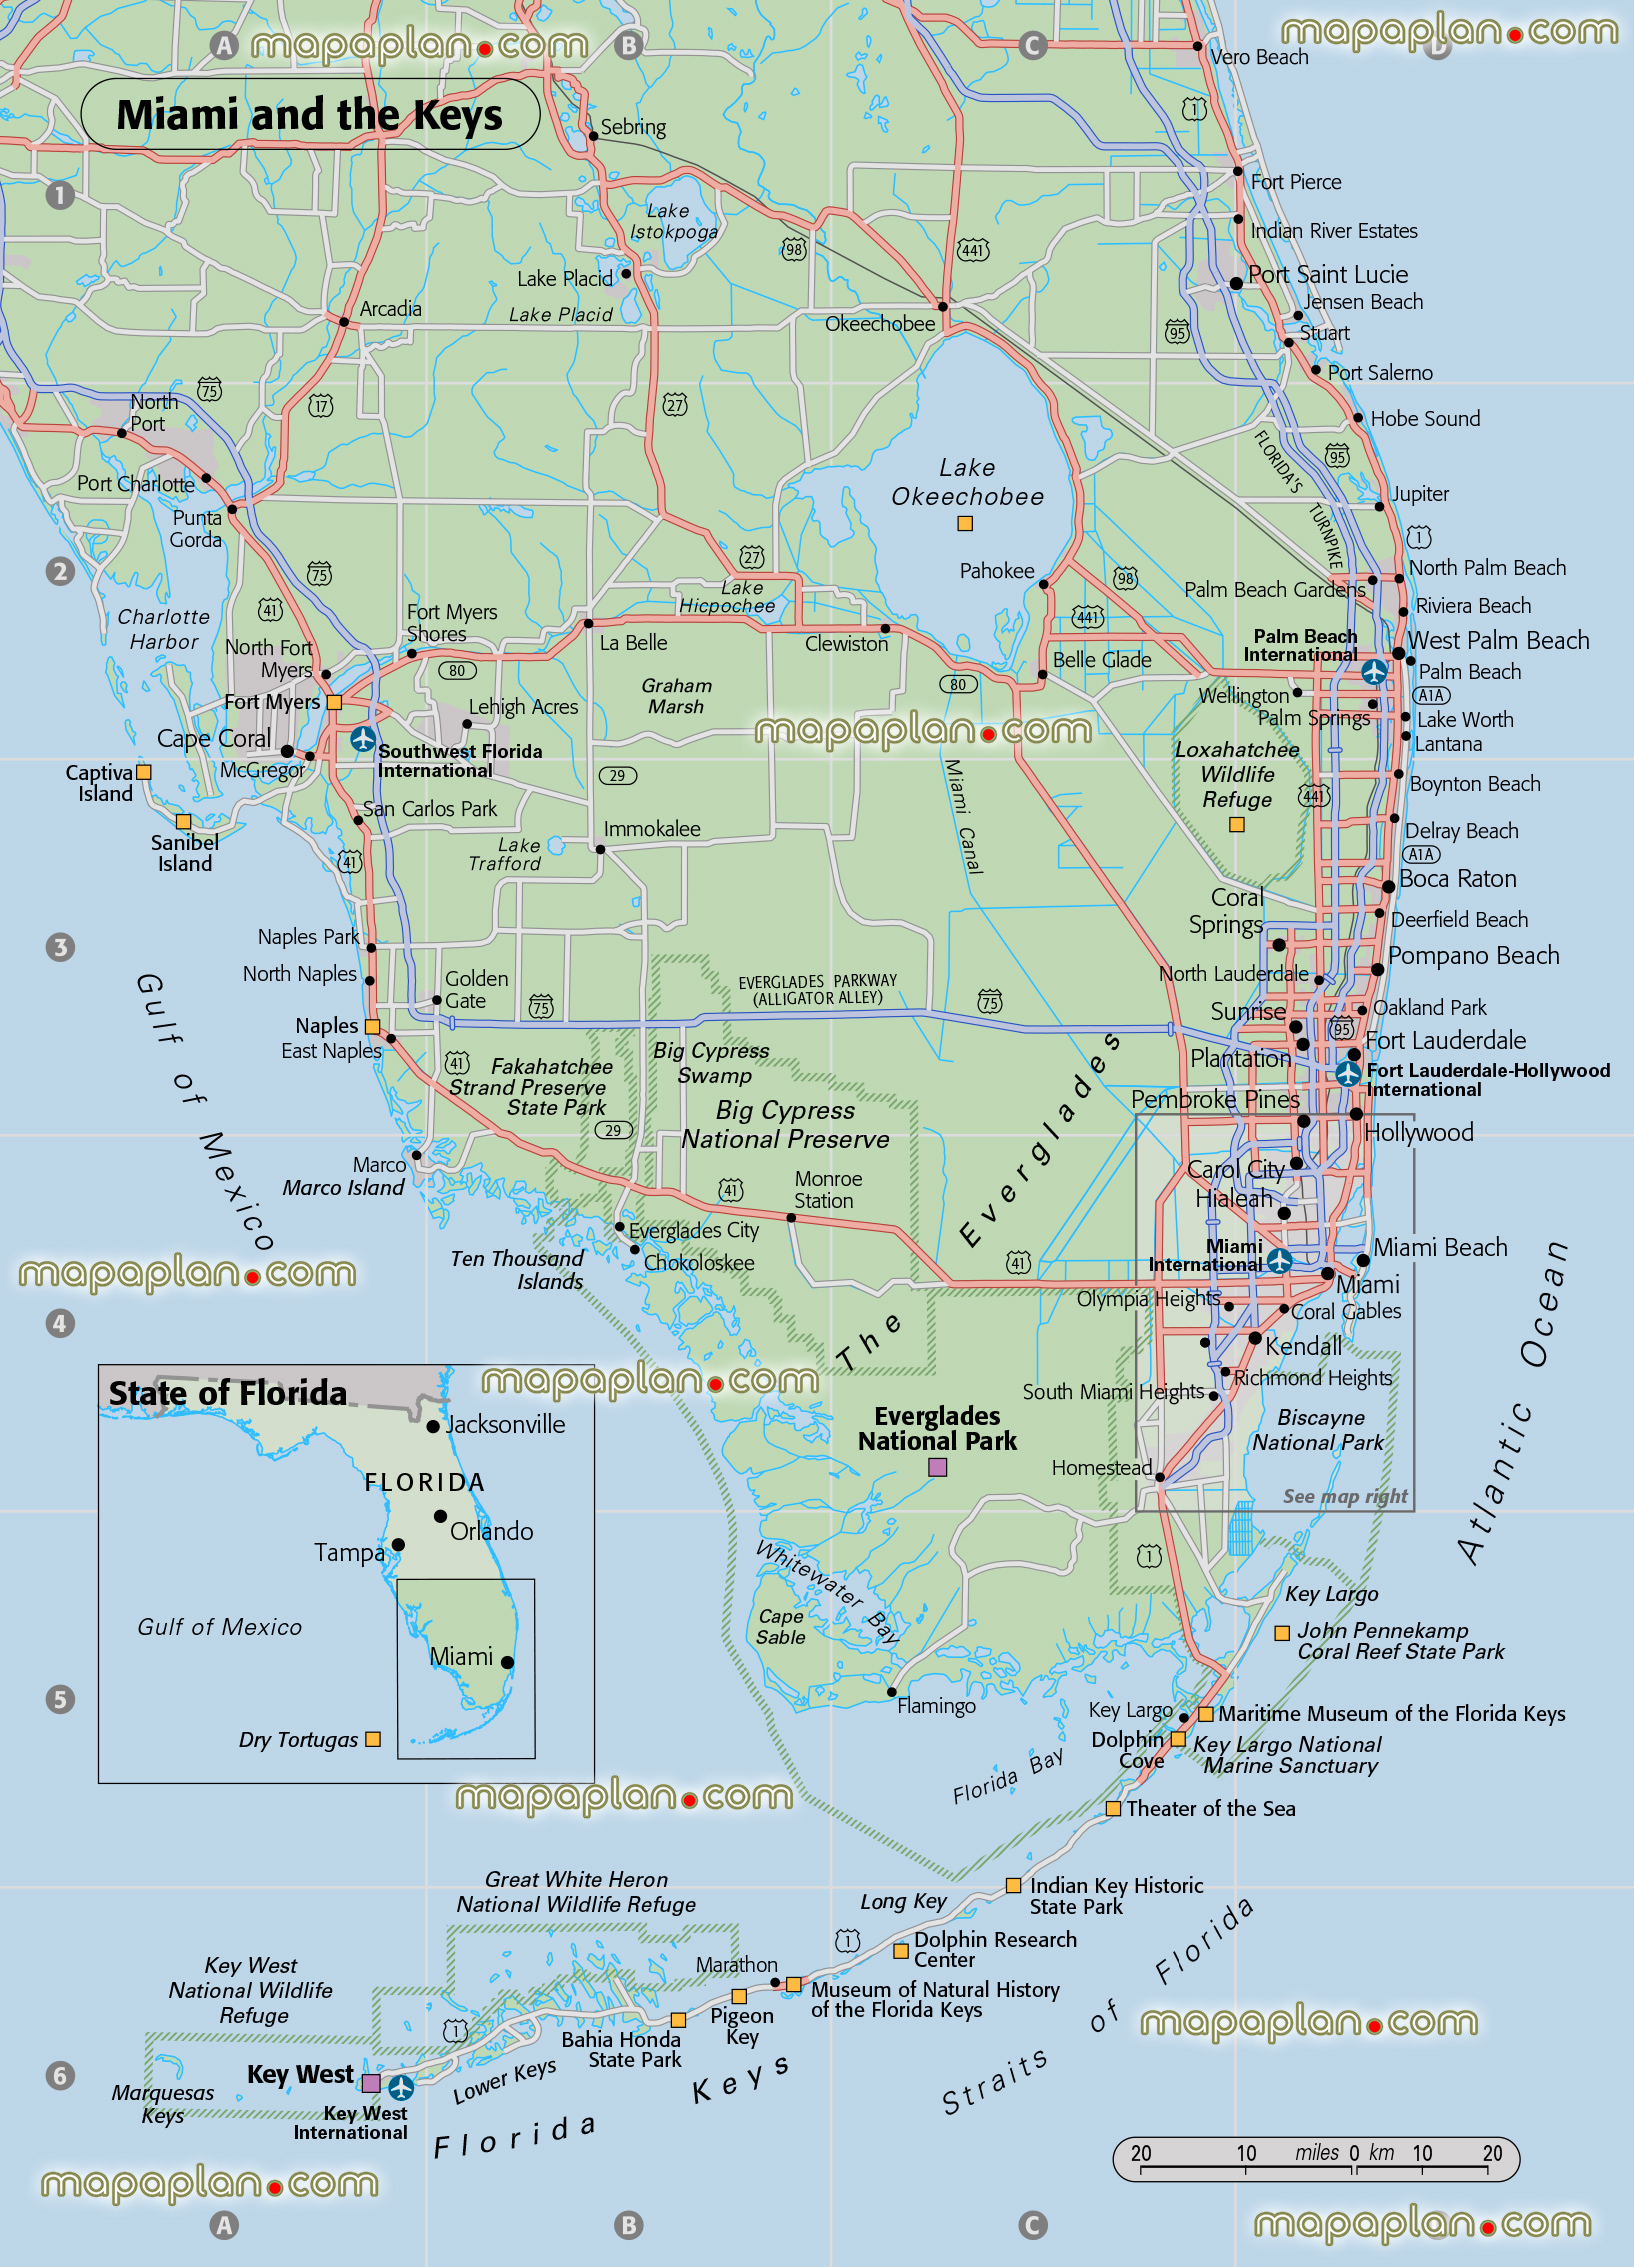 Miami florida state keys everglades gulf mexico atlantic ocean free download print trip travel guide locations major attractions great historic spots best must see sights detailed view orientation navigation directions